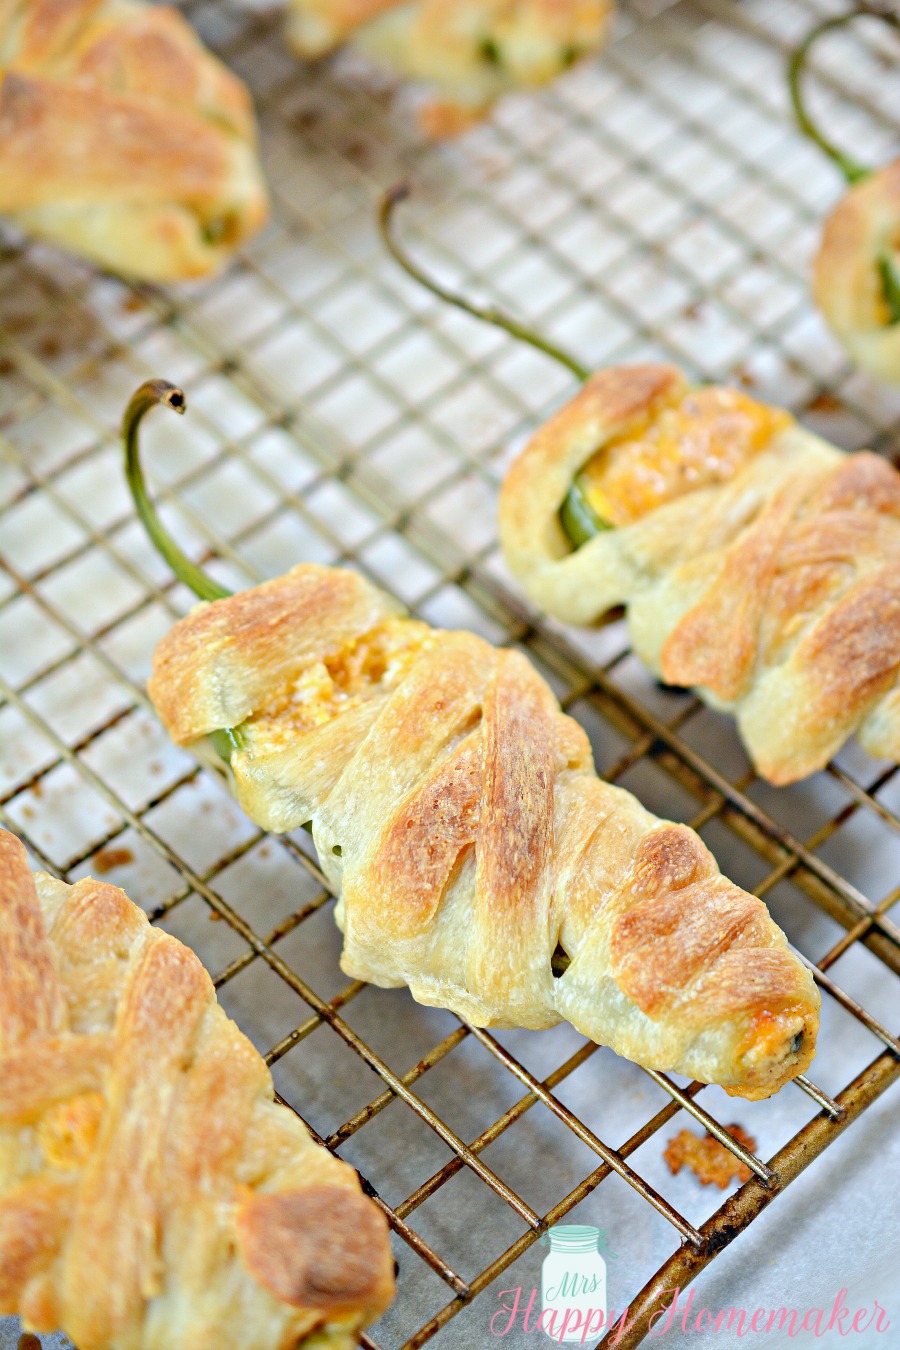 Jalapeno Popper Mummies - jalapeños stuffed with cheese and wrapped in refrigerated dough strips to resemble mummy wrappings. 